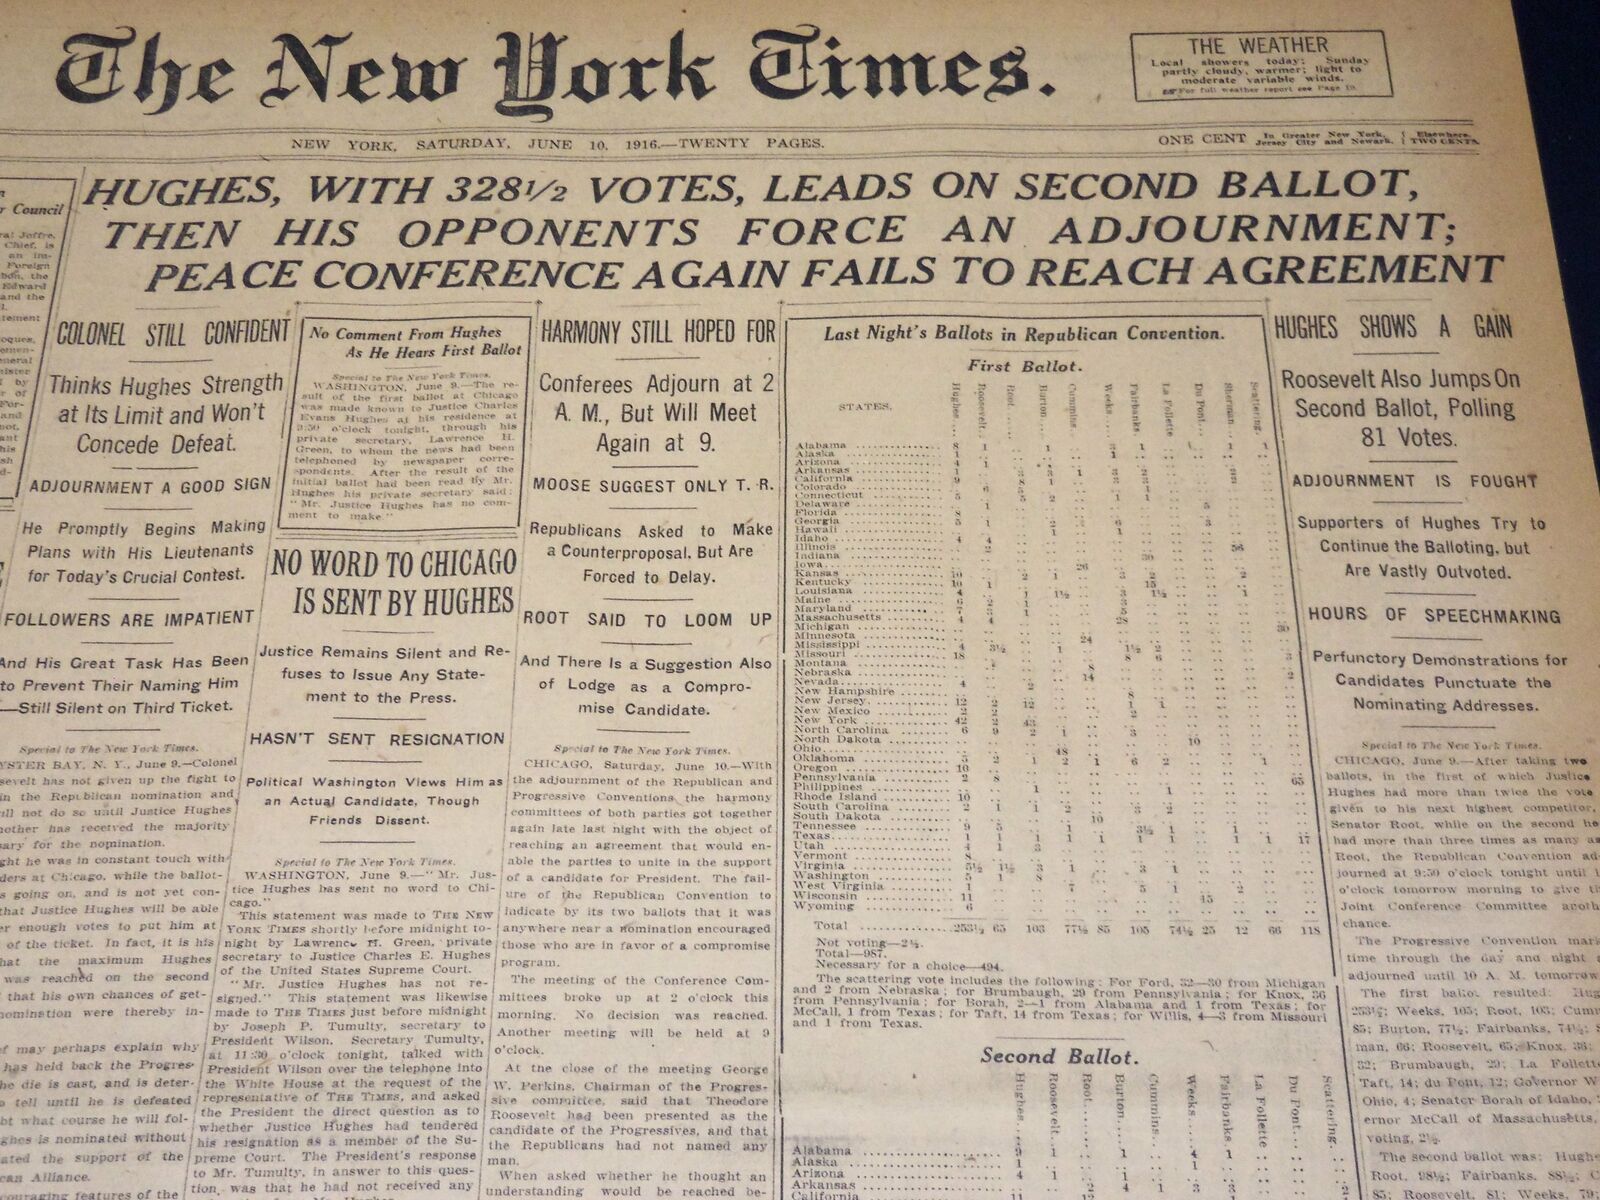 1916 JUNE 10 NEW YORK TIMES - HUGHES LEADS WITH 328 1/2 VOTES - NT 8610